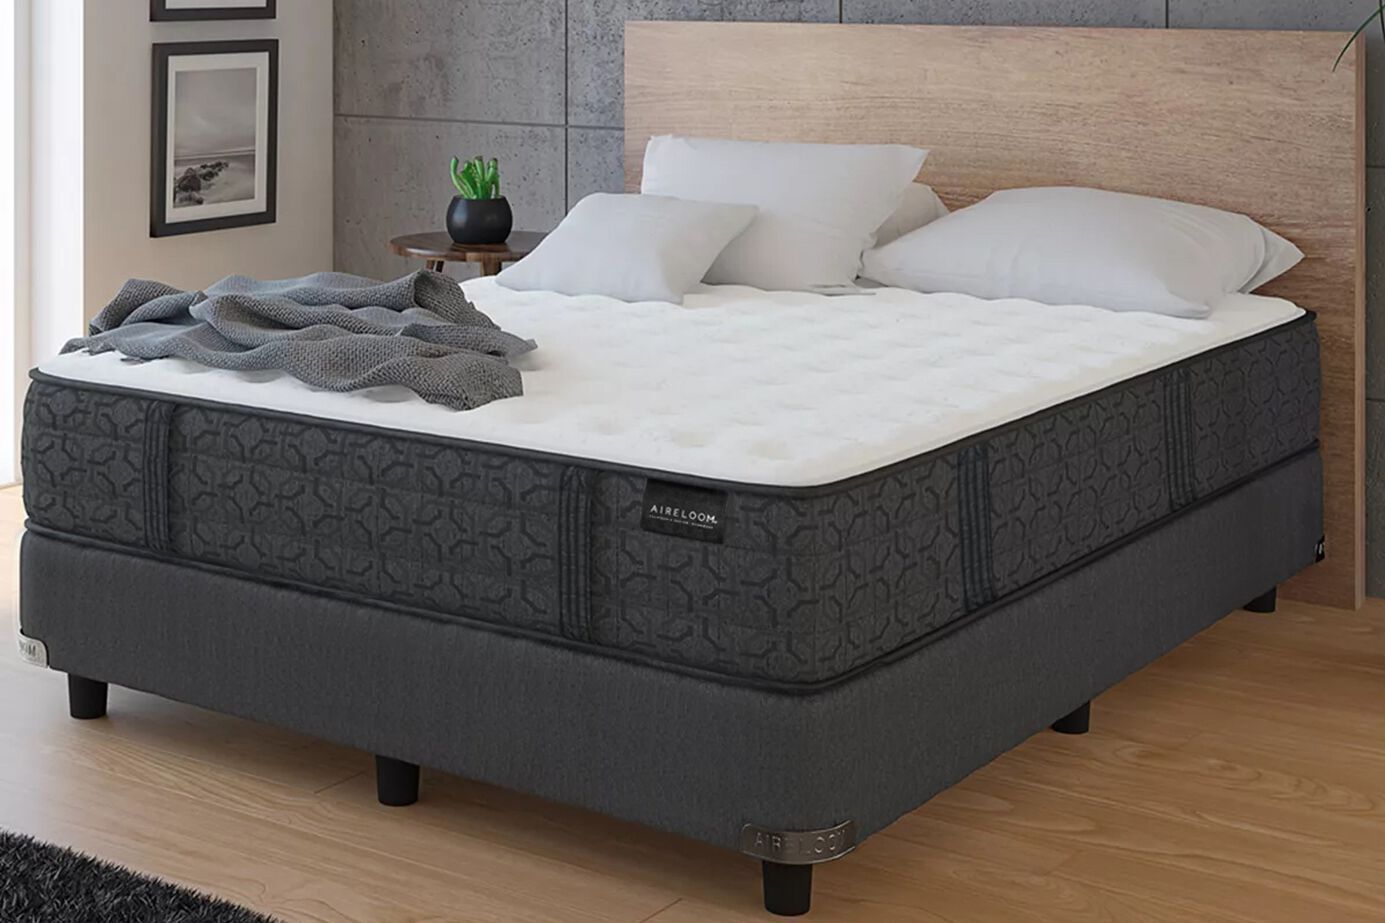 Aireloom Pacific Bay Gemini Firm Mattress 11.5" image number 0